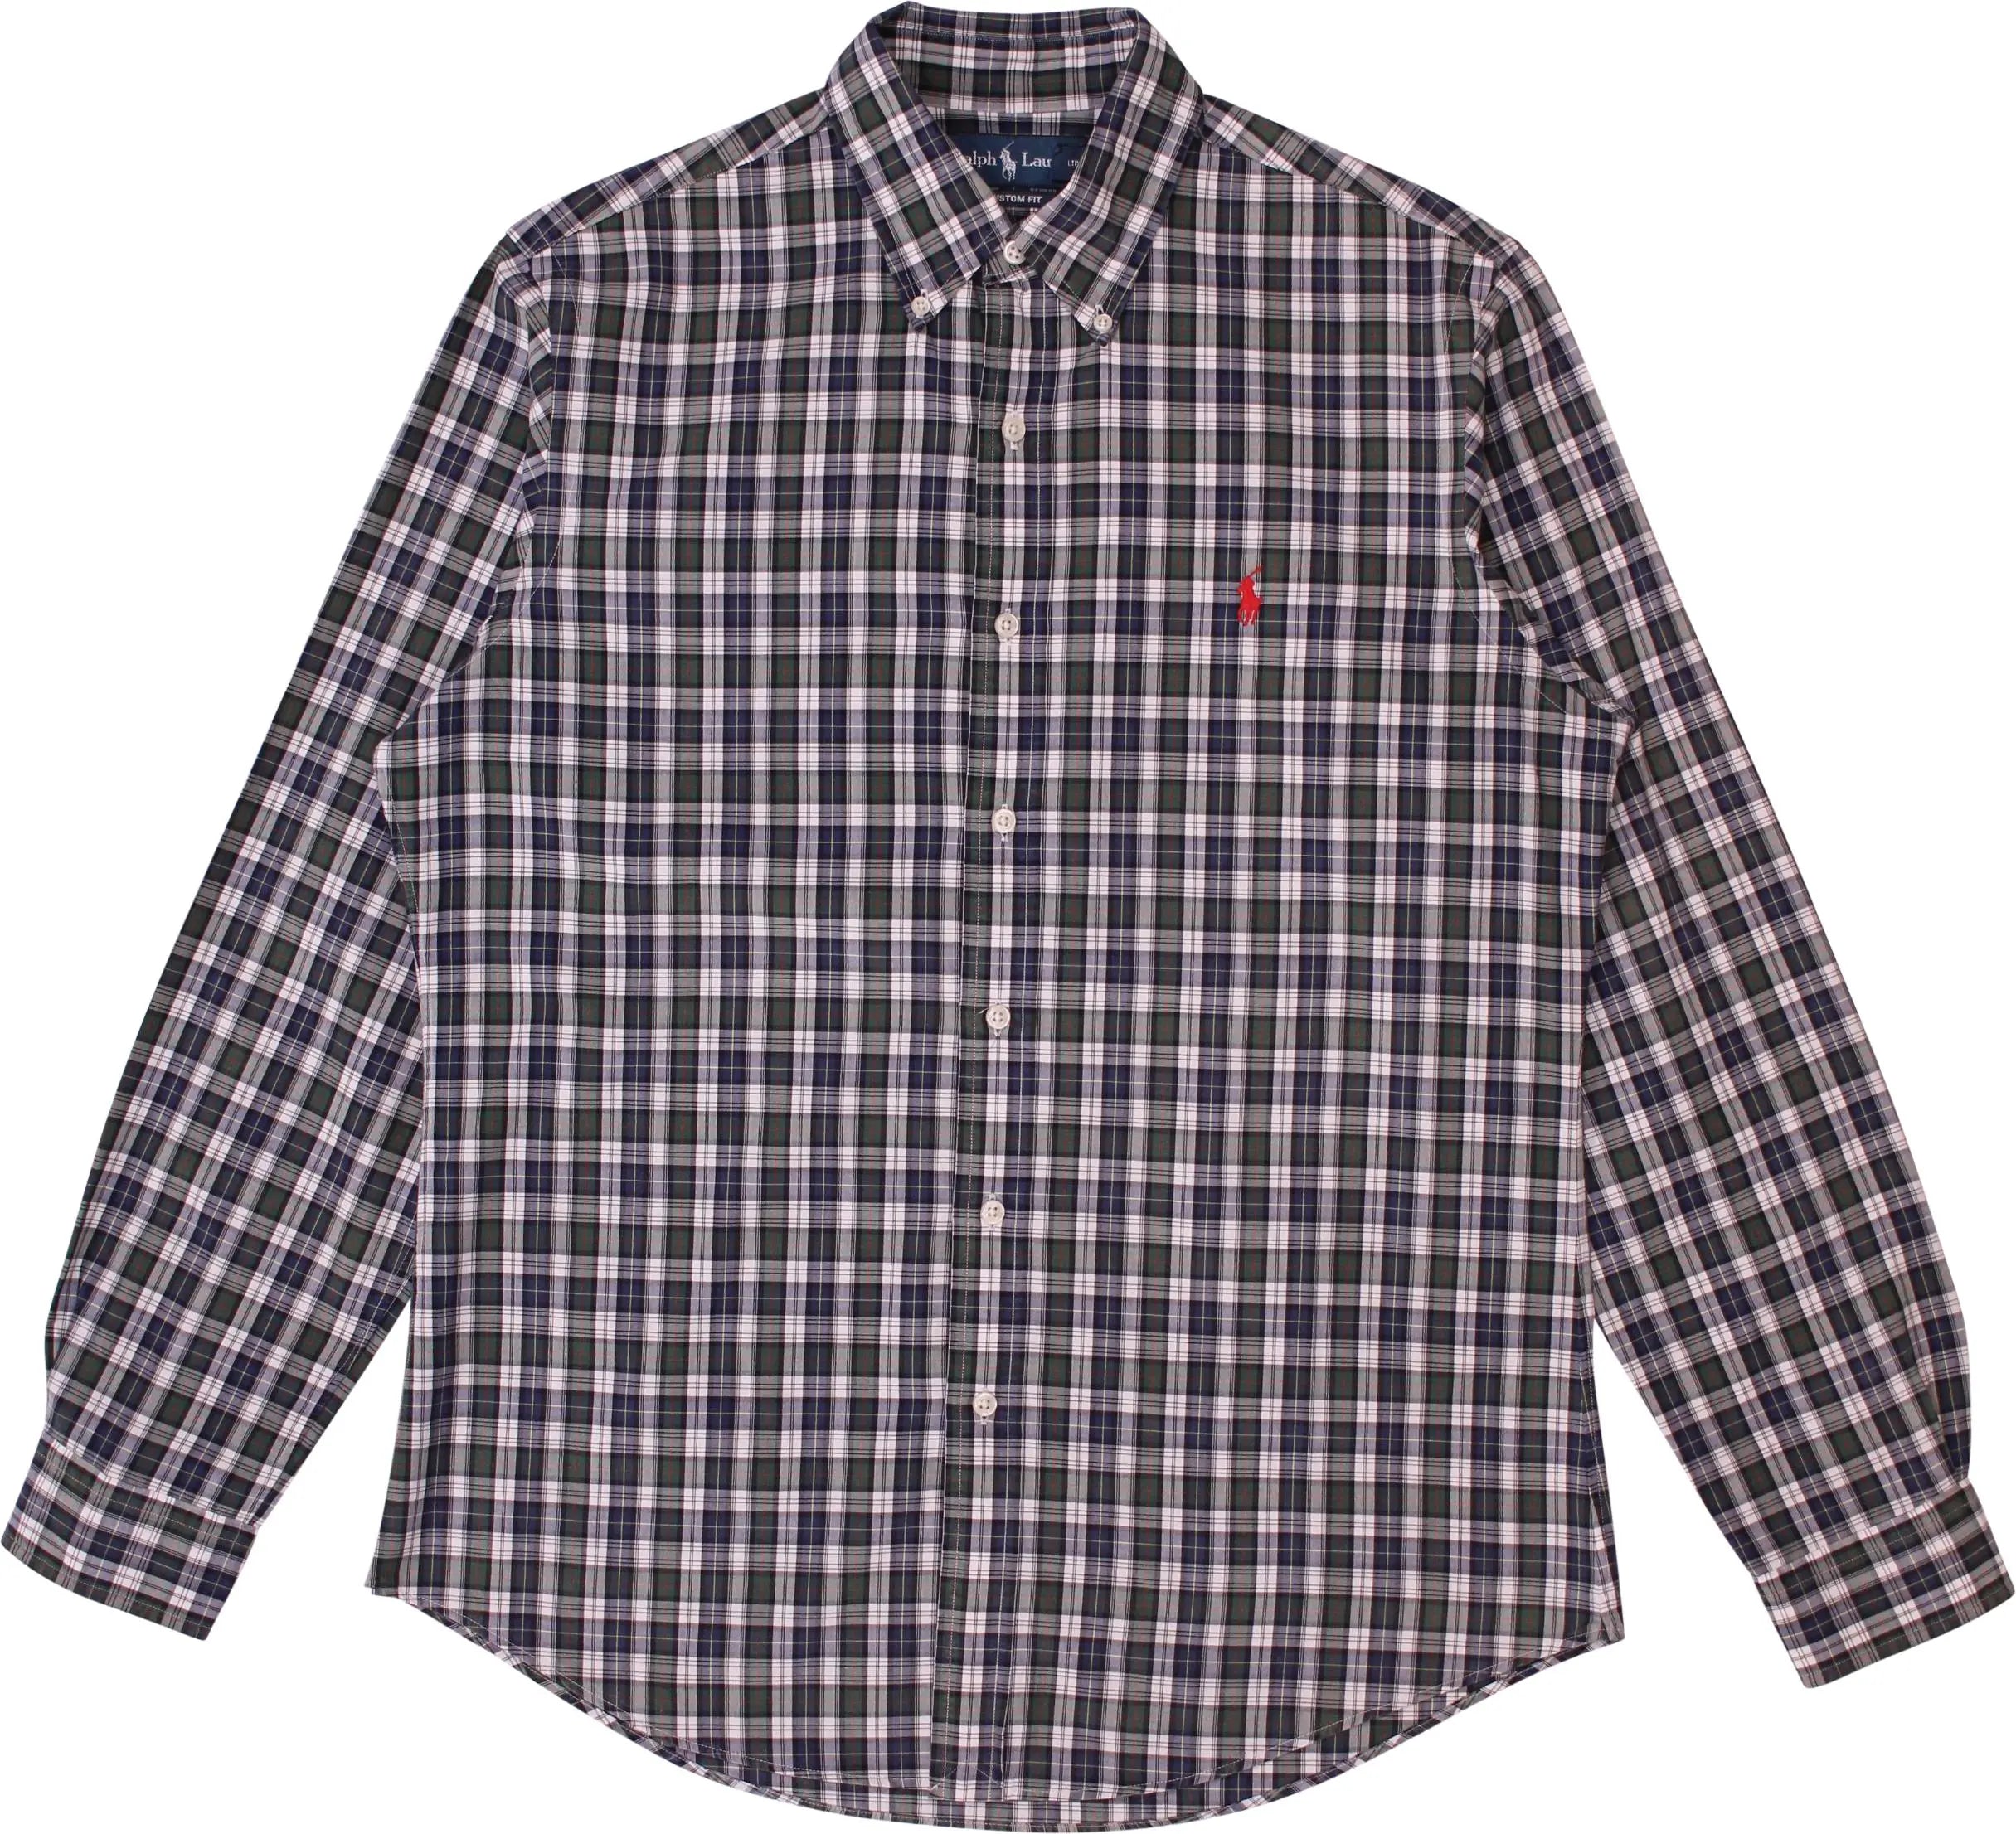 Ralph Lauren - Green Checked Shirt by Ralph Lauren- ThriftTale.com - Vintage and second handclothing